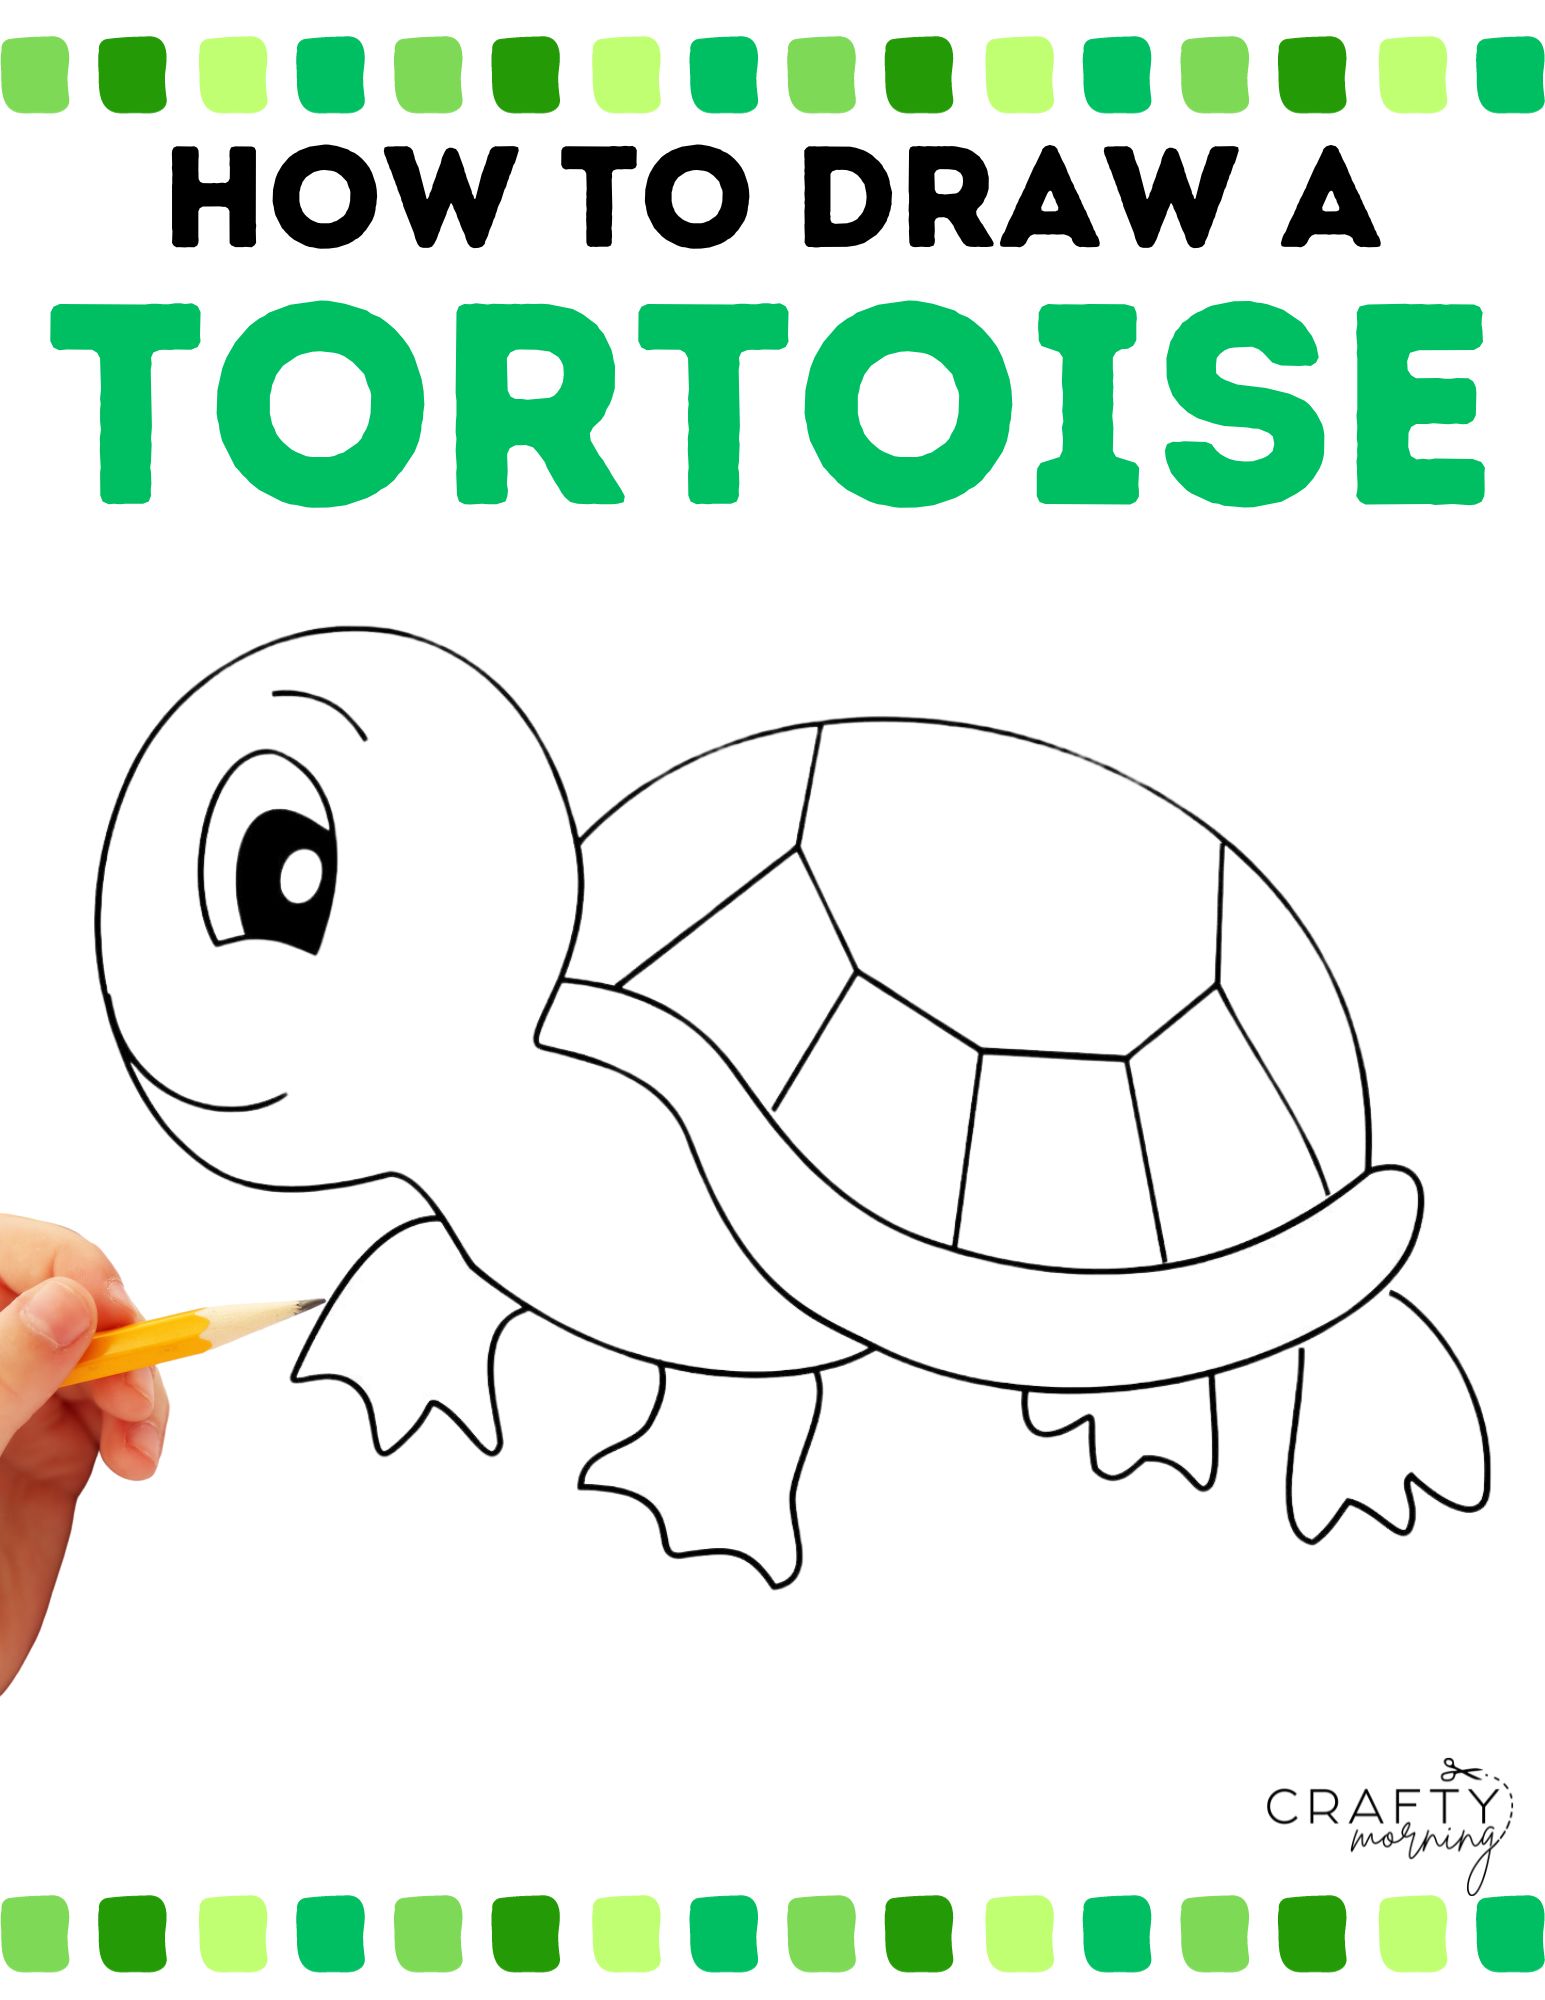 Tortoise Coloring Pages · Creative Fabrica